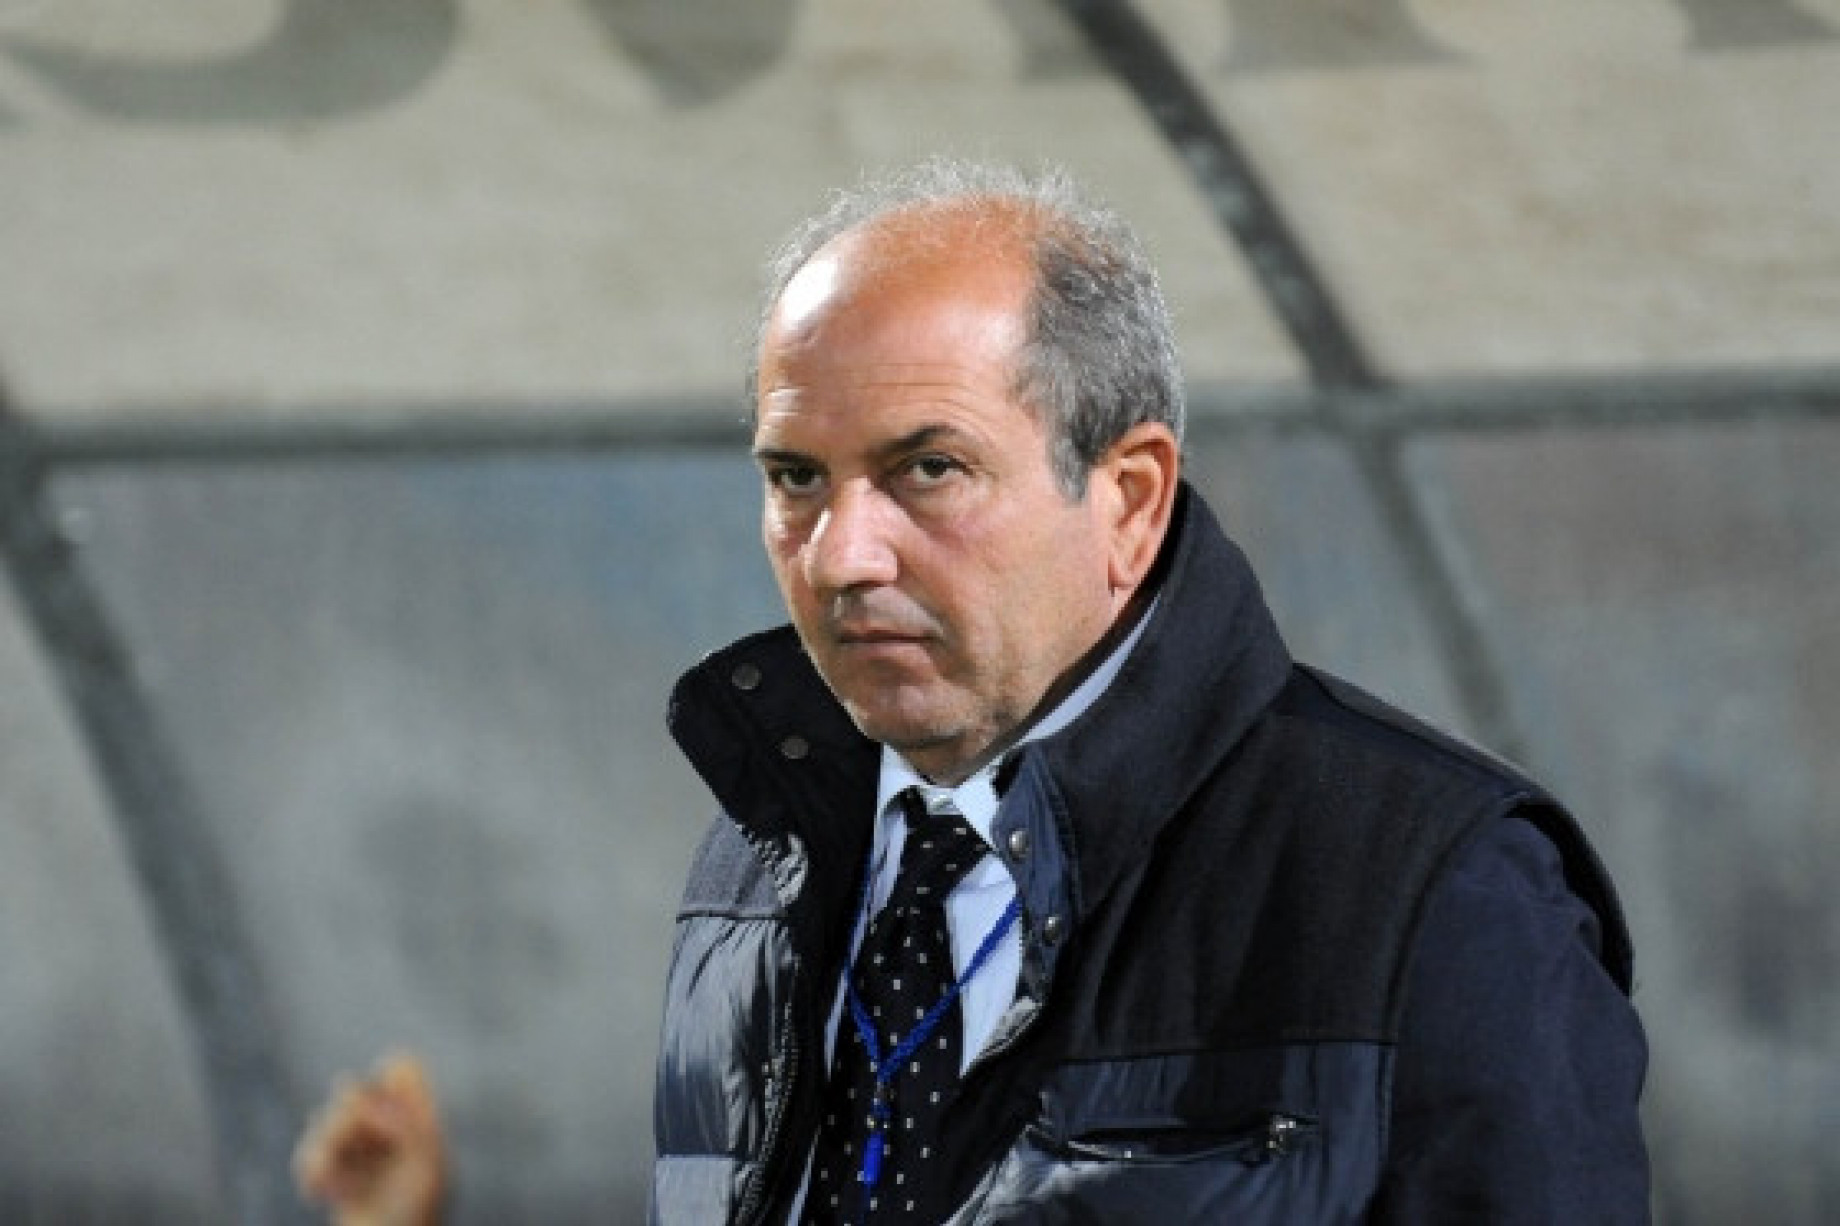 Lazio exec Angelo Fabiani dismissed the chatter about an ongoing feud between Claudio Lotito and Maurizio Sarri: "I wasn't the peacekeeper."